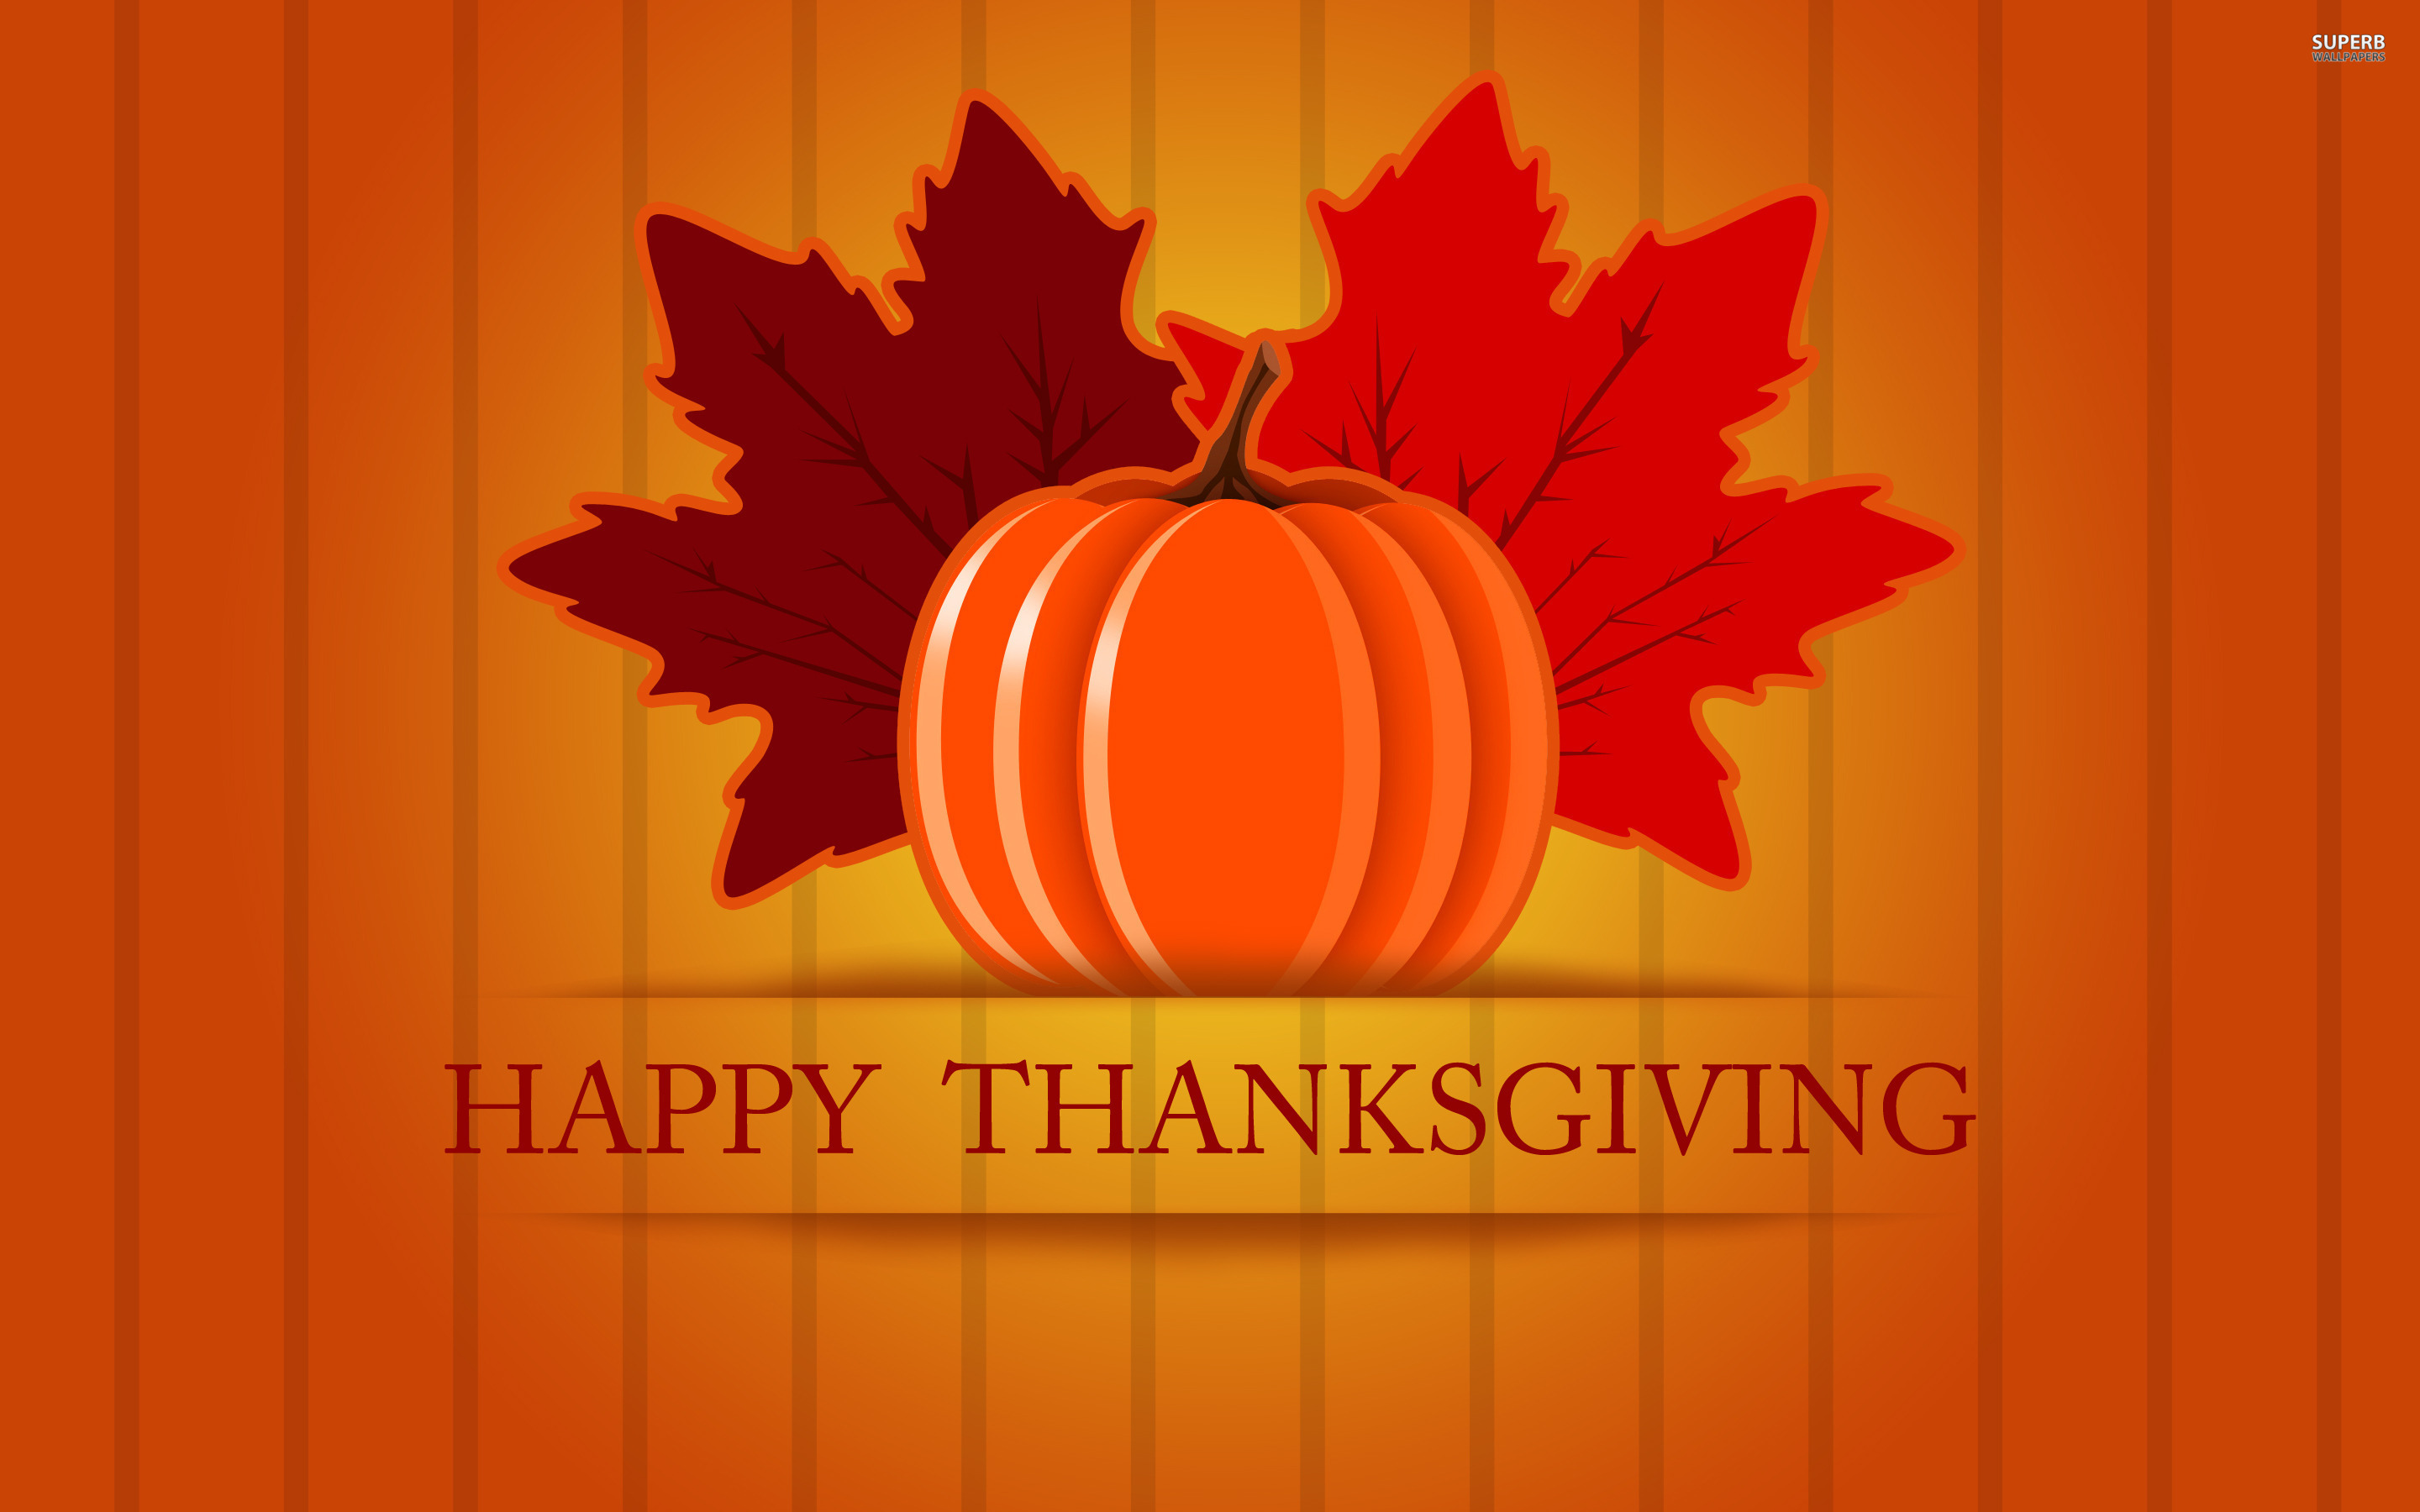 Thanksgiving Background Picture Of A Happy